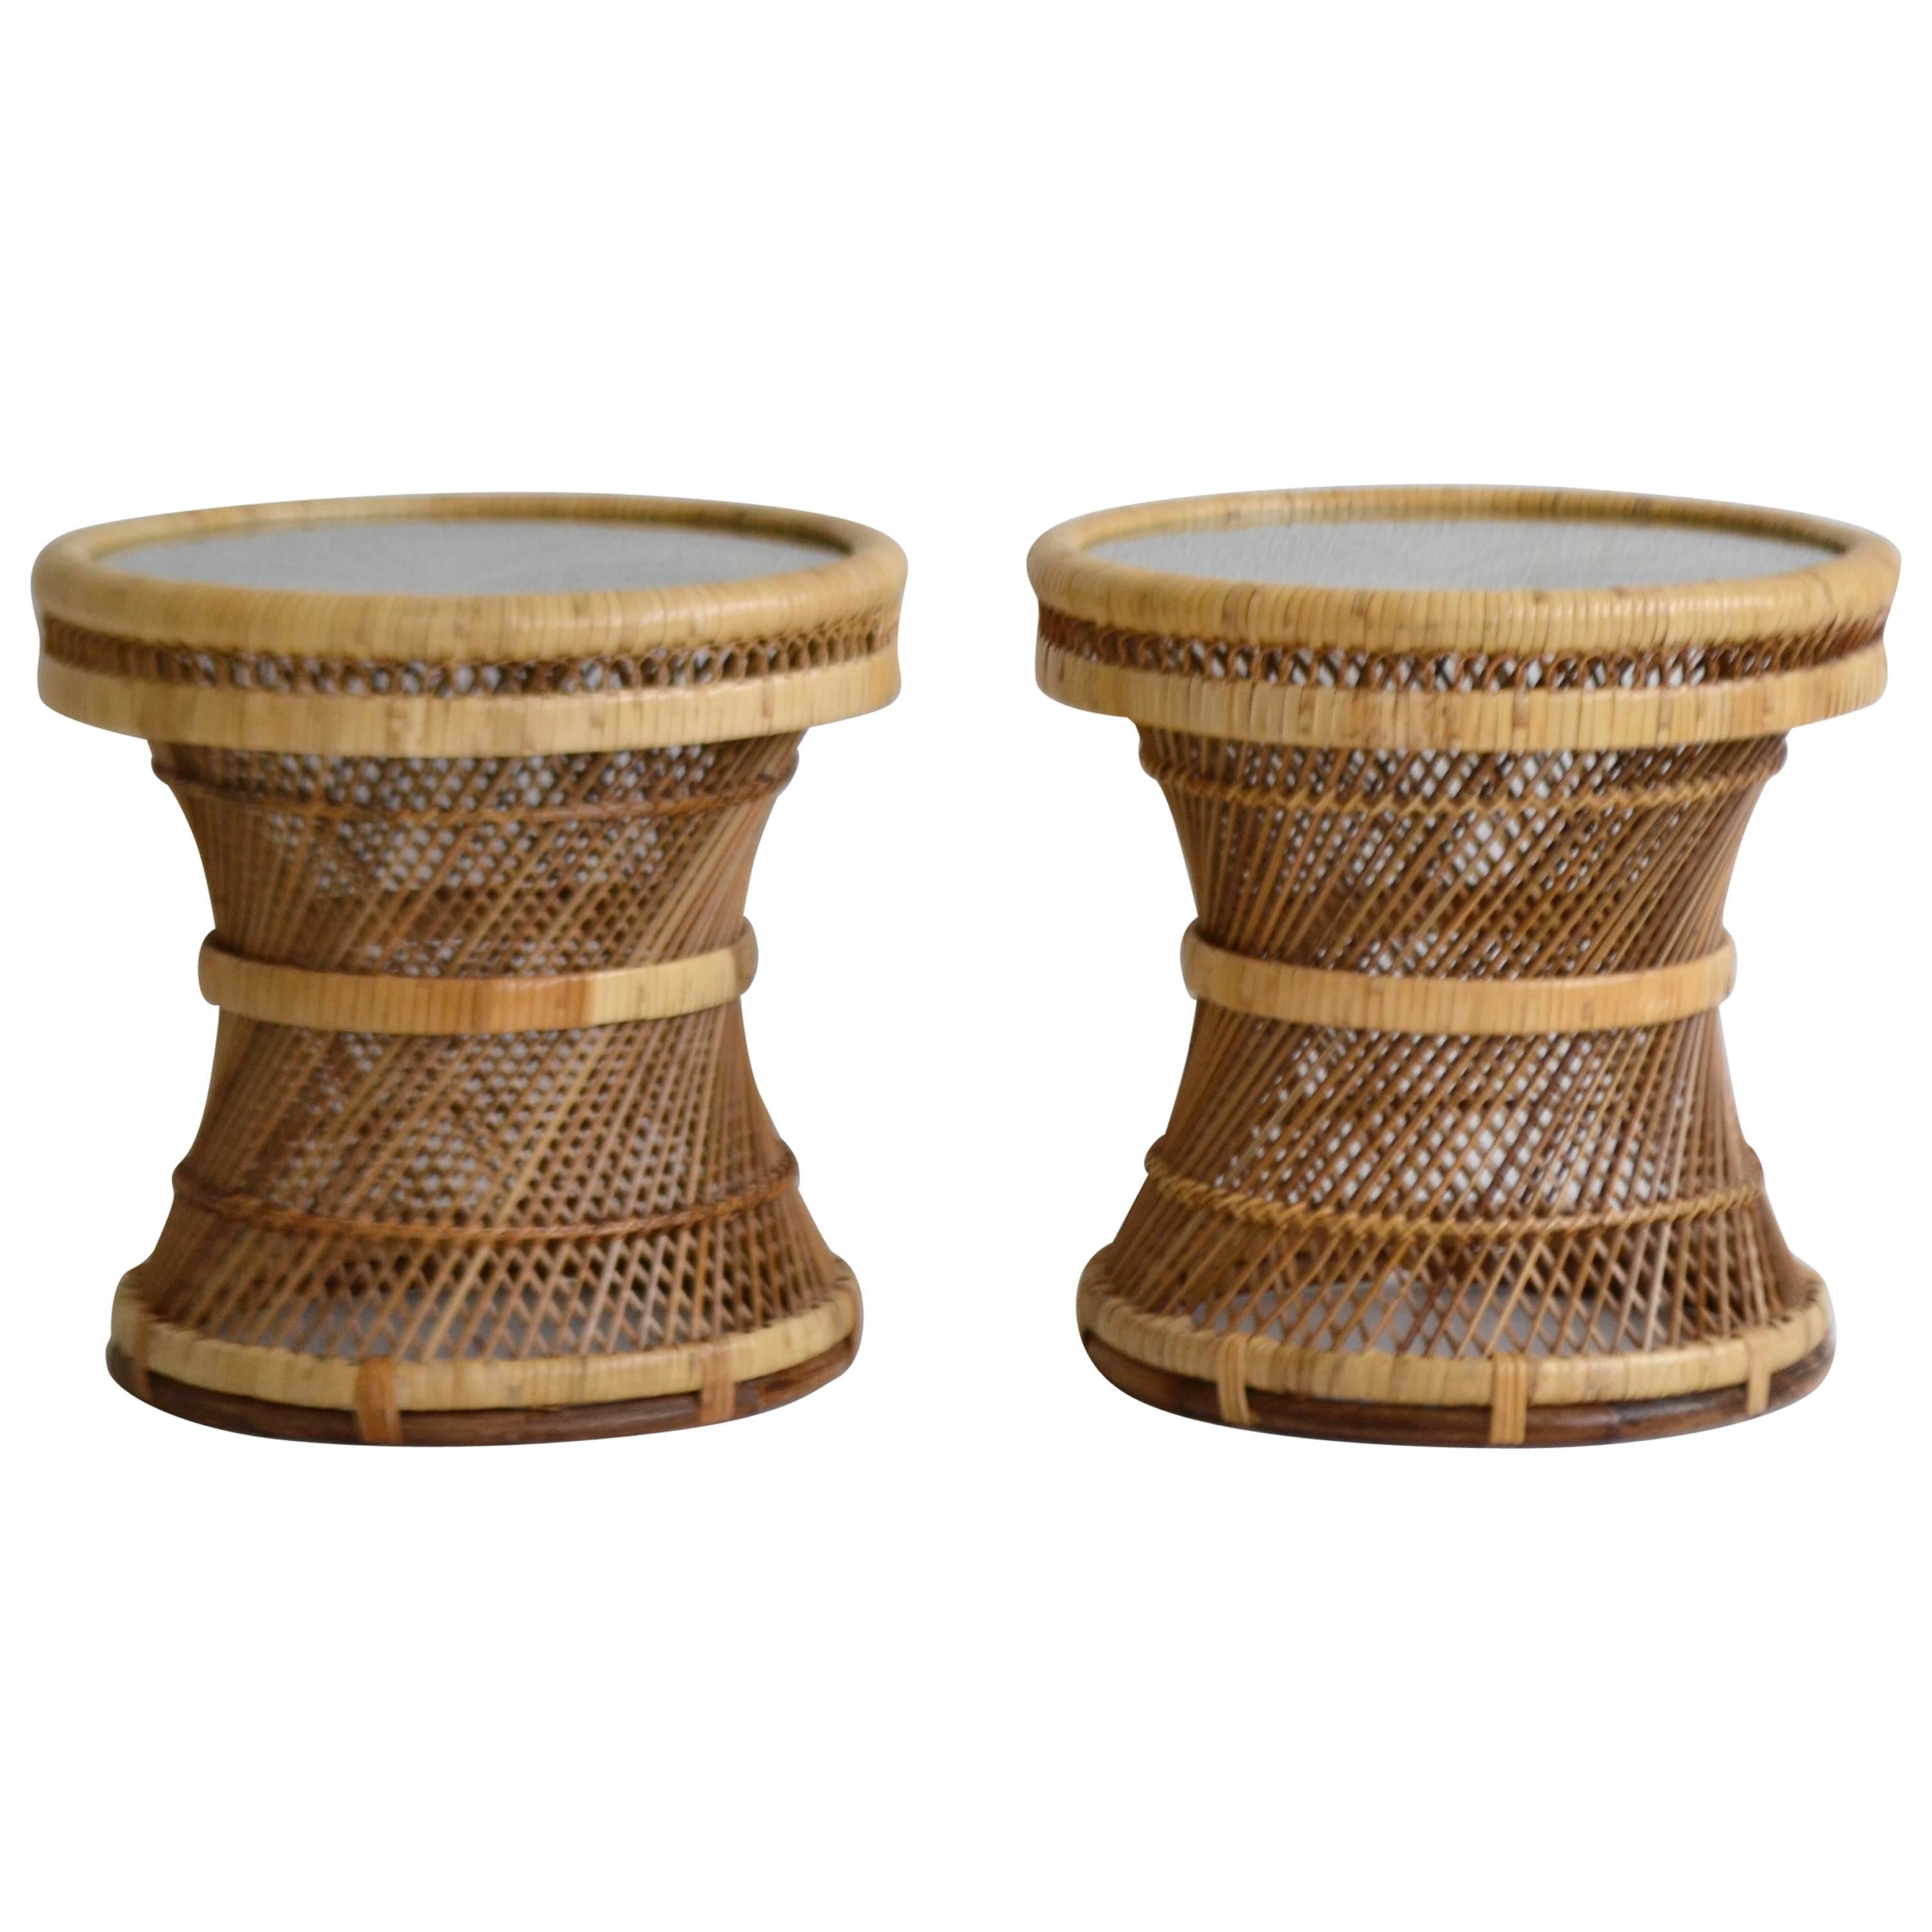 Pair of Mid-Century Woven Rattan Occasional Tables or Side Tables